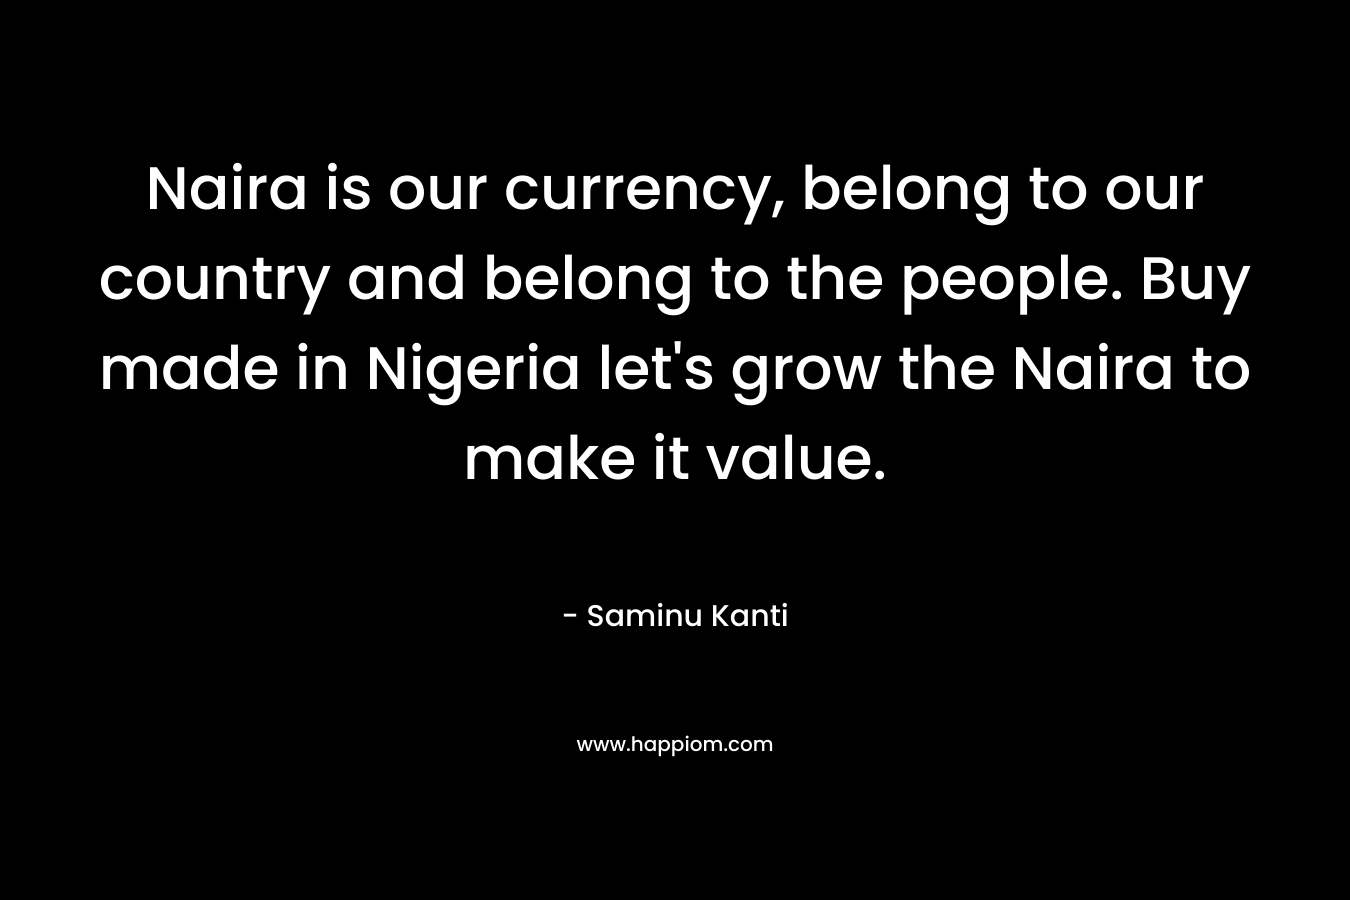 Naira is our currency, belong to our country and belong to the people. Buy made in Nigeria let's grow the Naira to make it value.